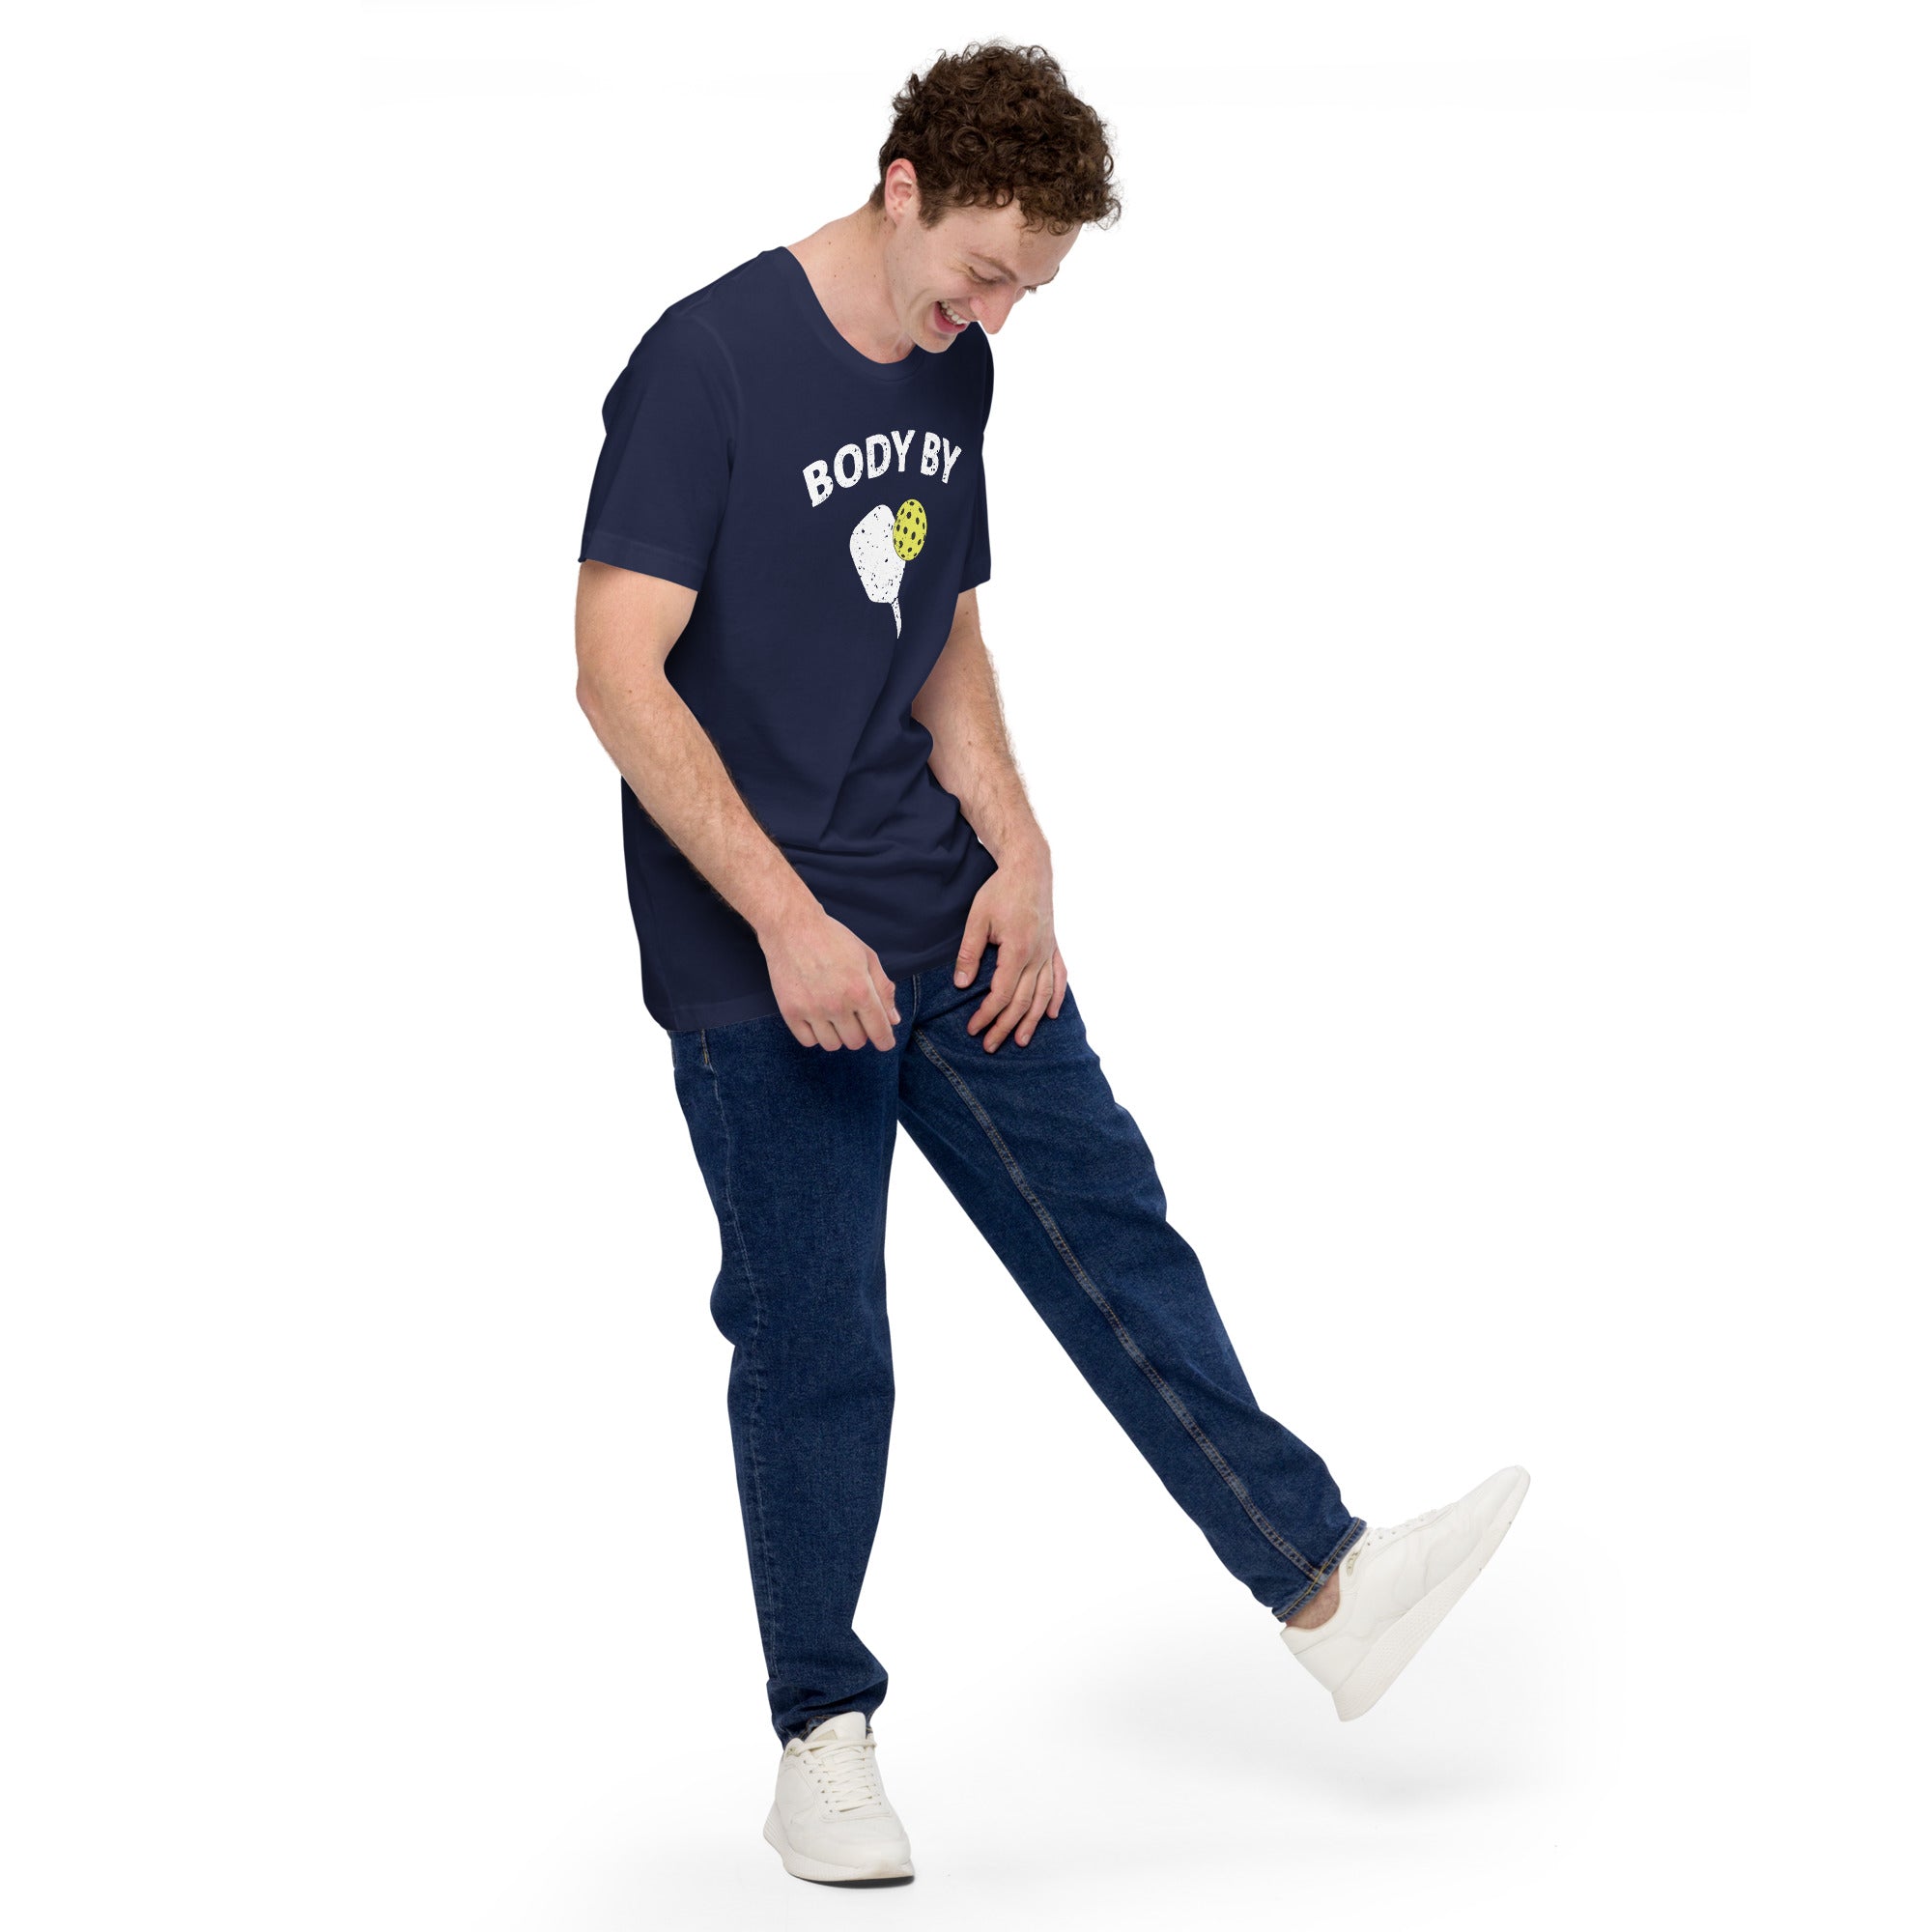 man looking down wearing navy blue body by pickleball shirt apparel with paddle and ball weathered look right side view